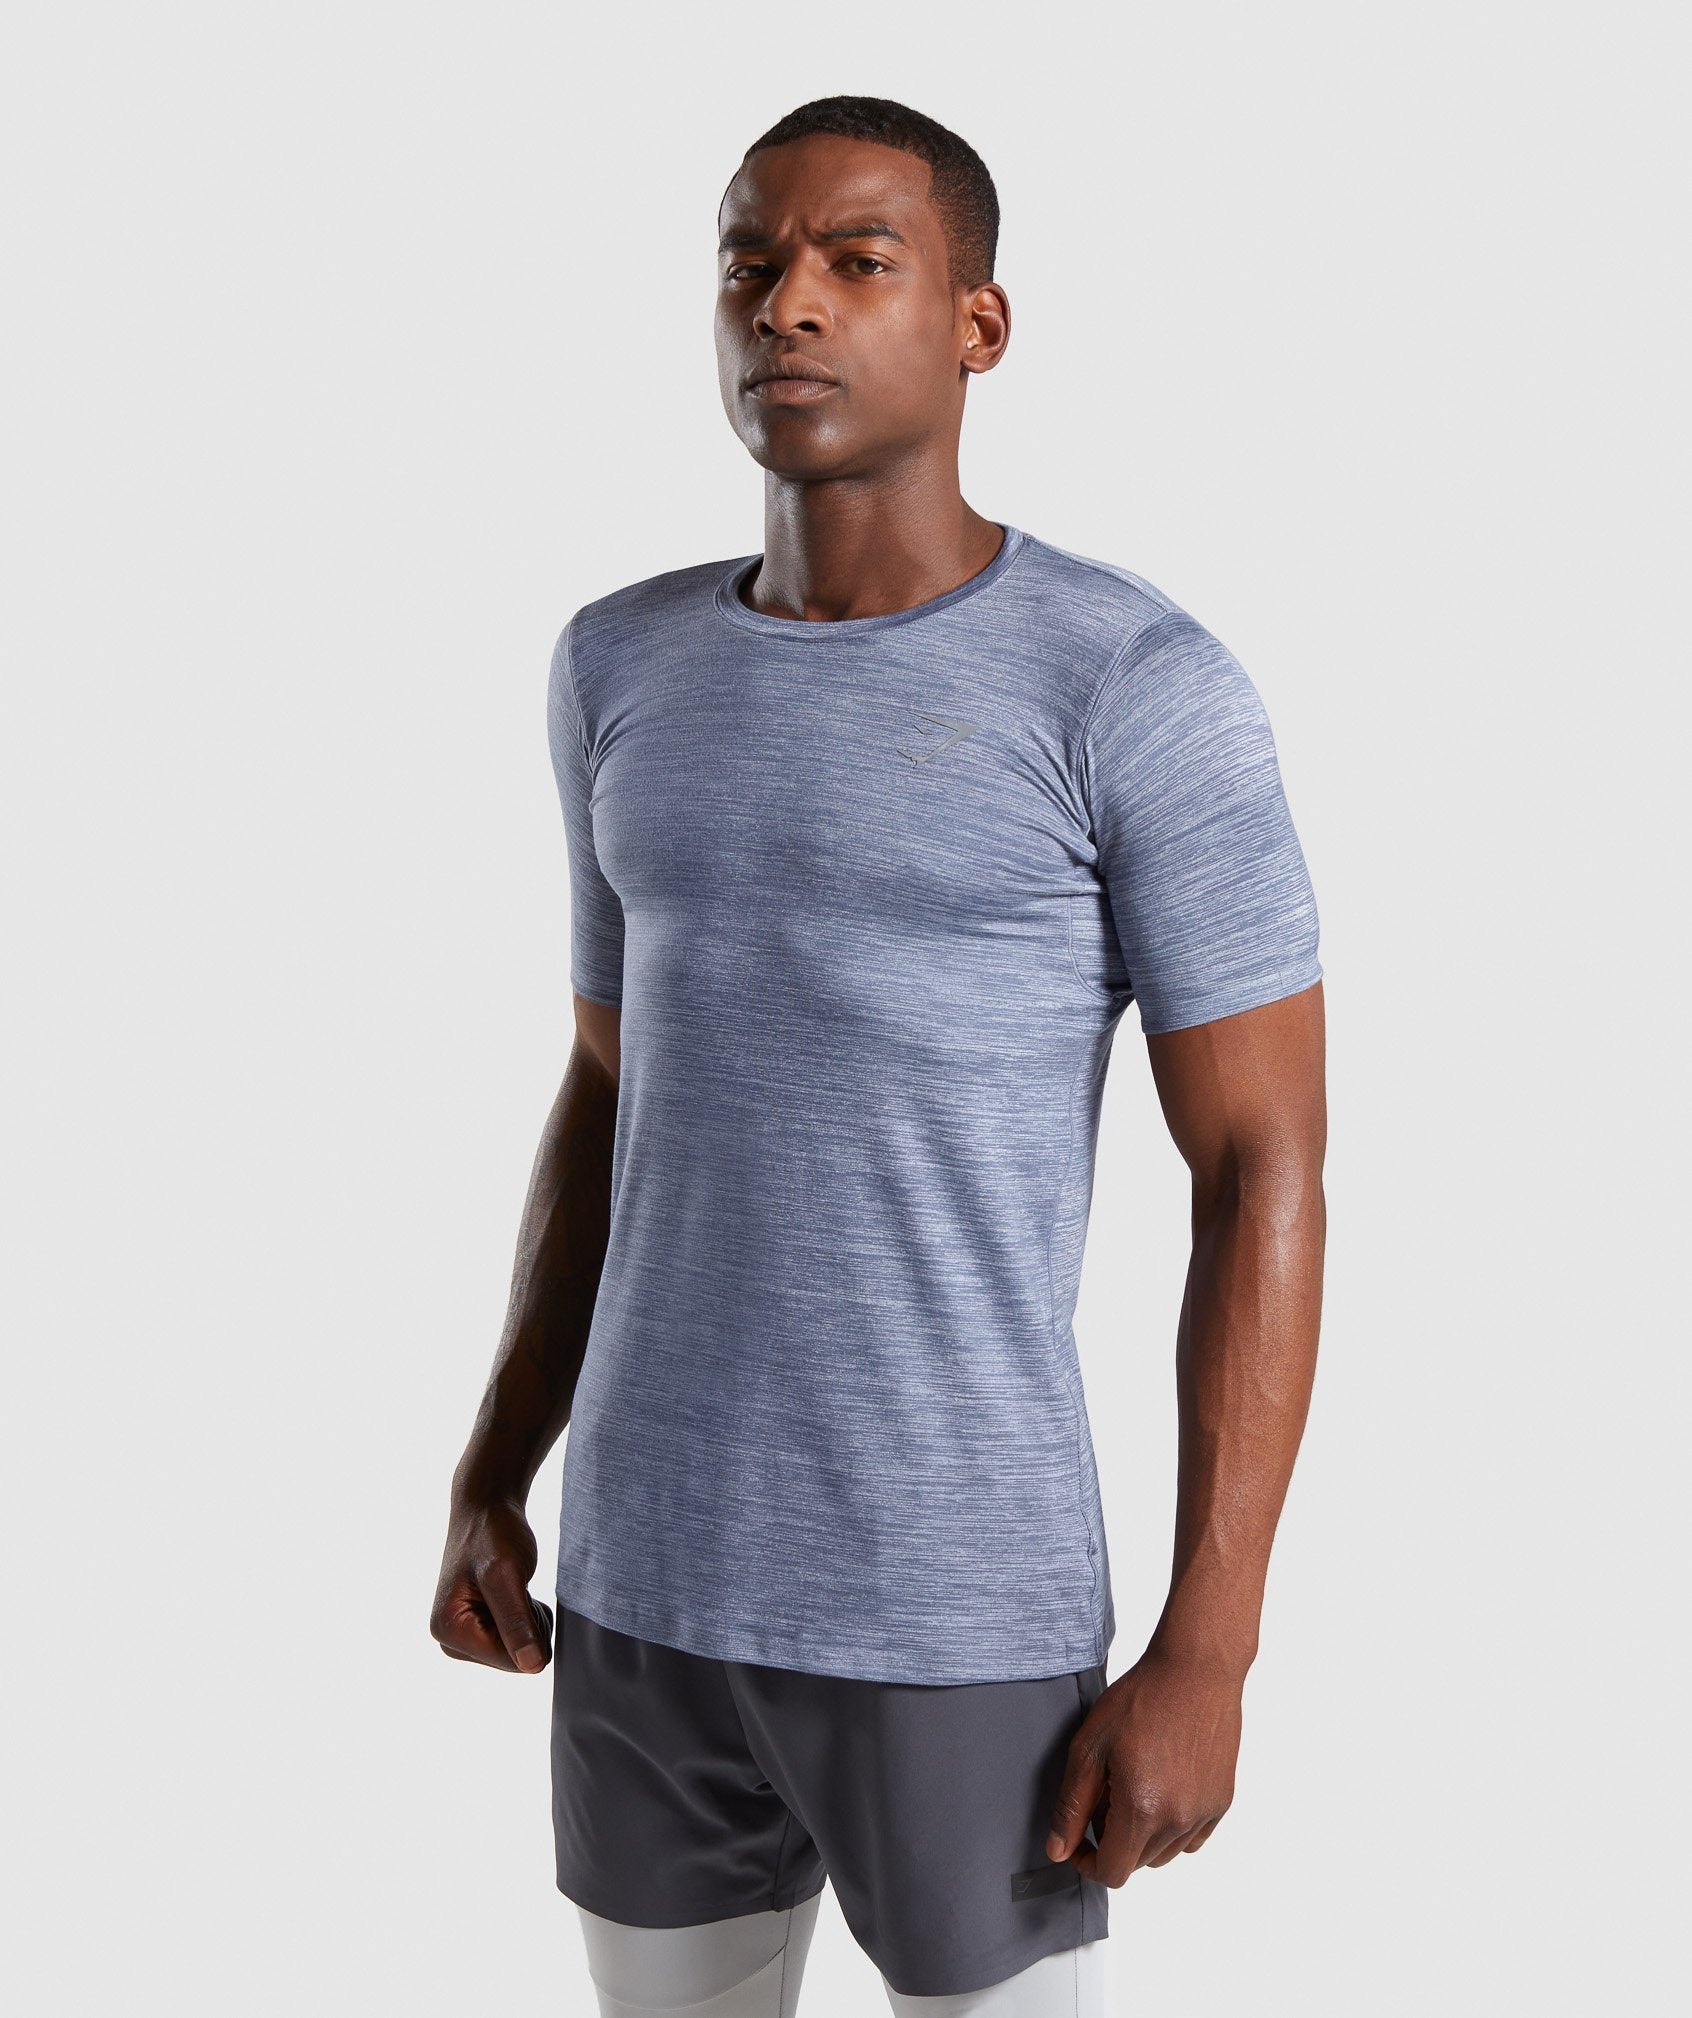 Swerve T-Shirt in Aegean Blue Marl - view 1